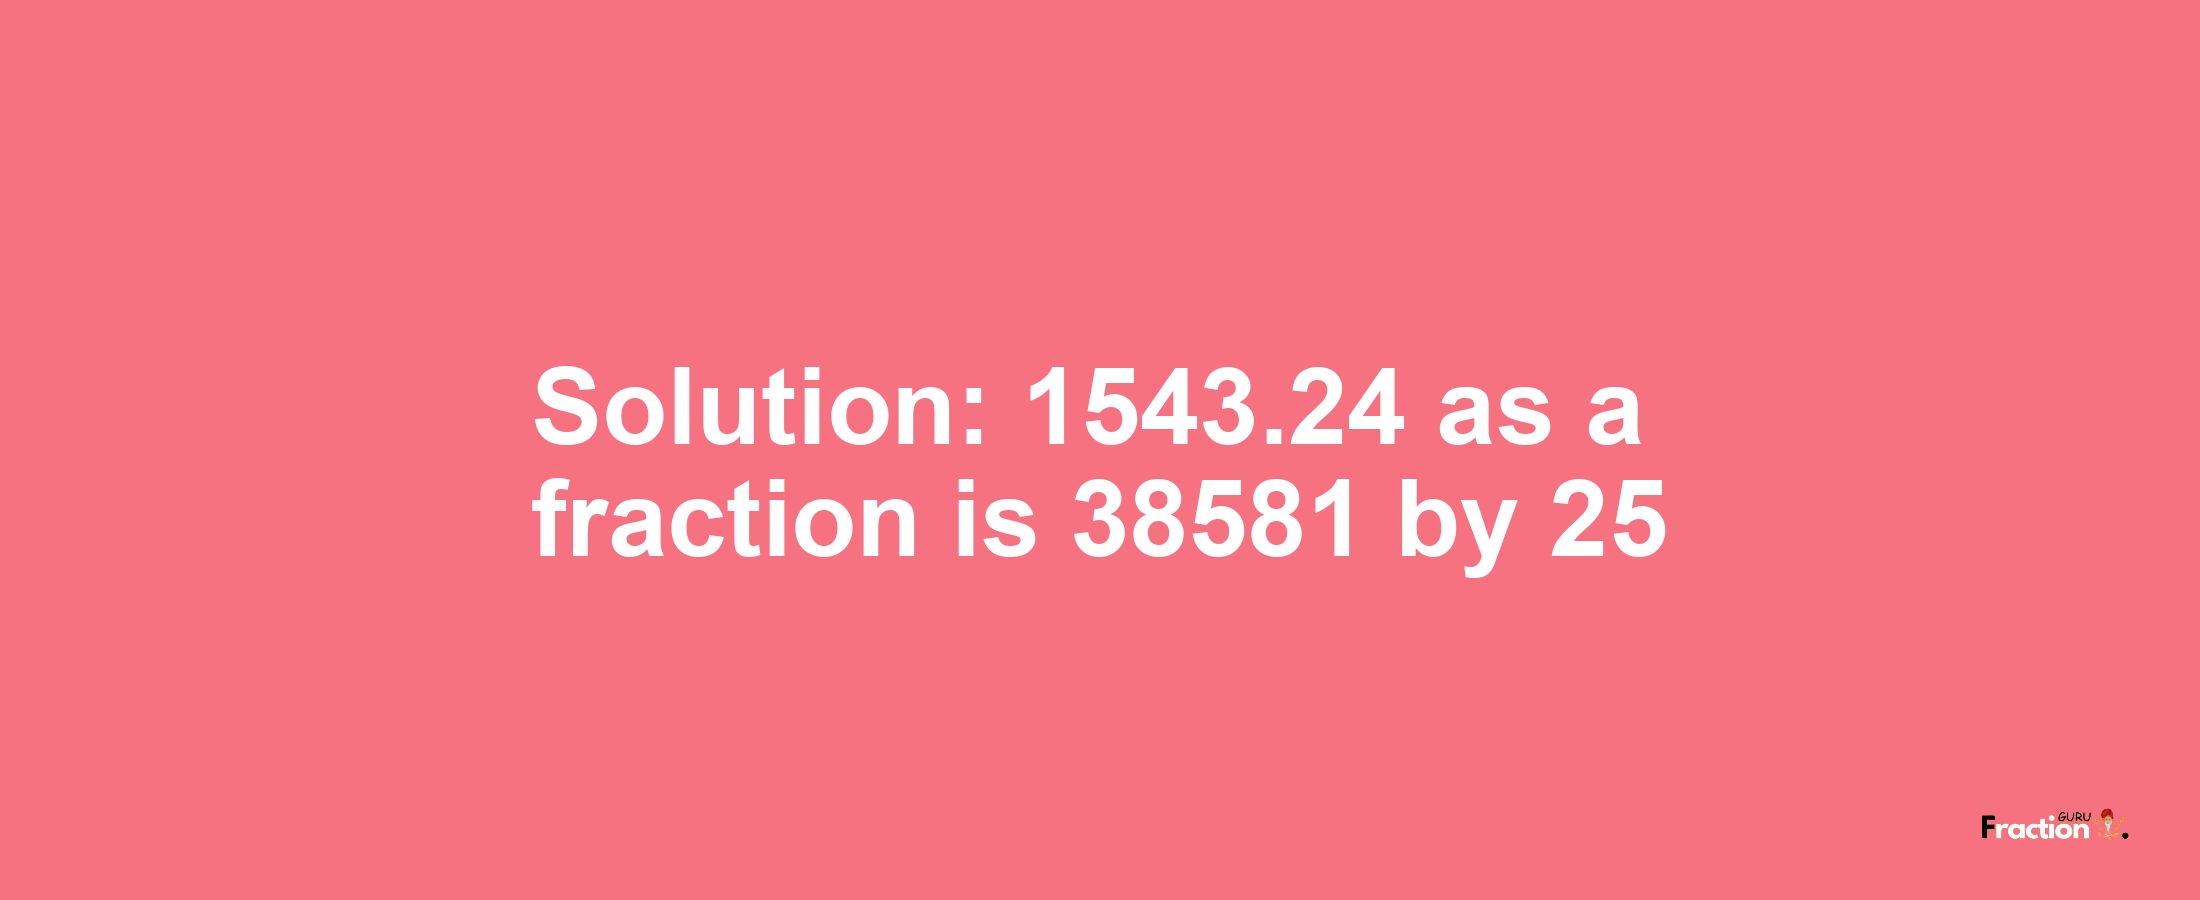 Solution:1543.24 as a fraction is 38581/25